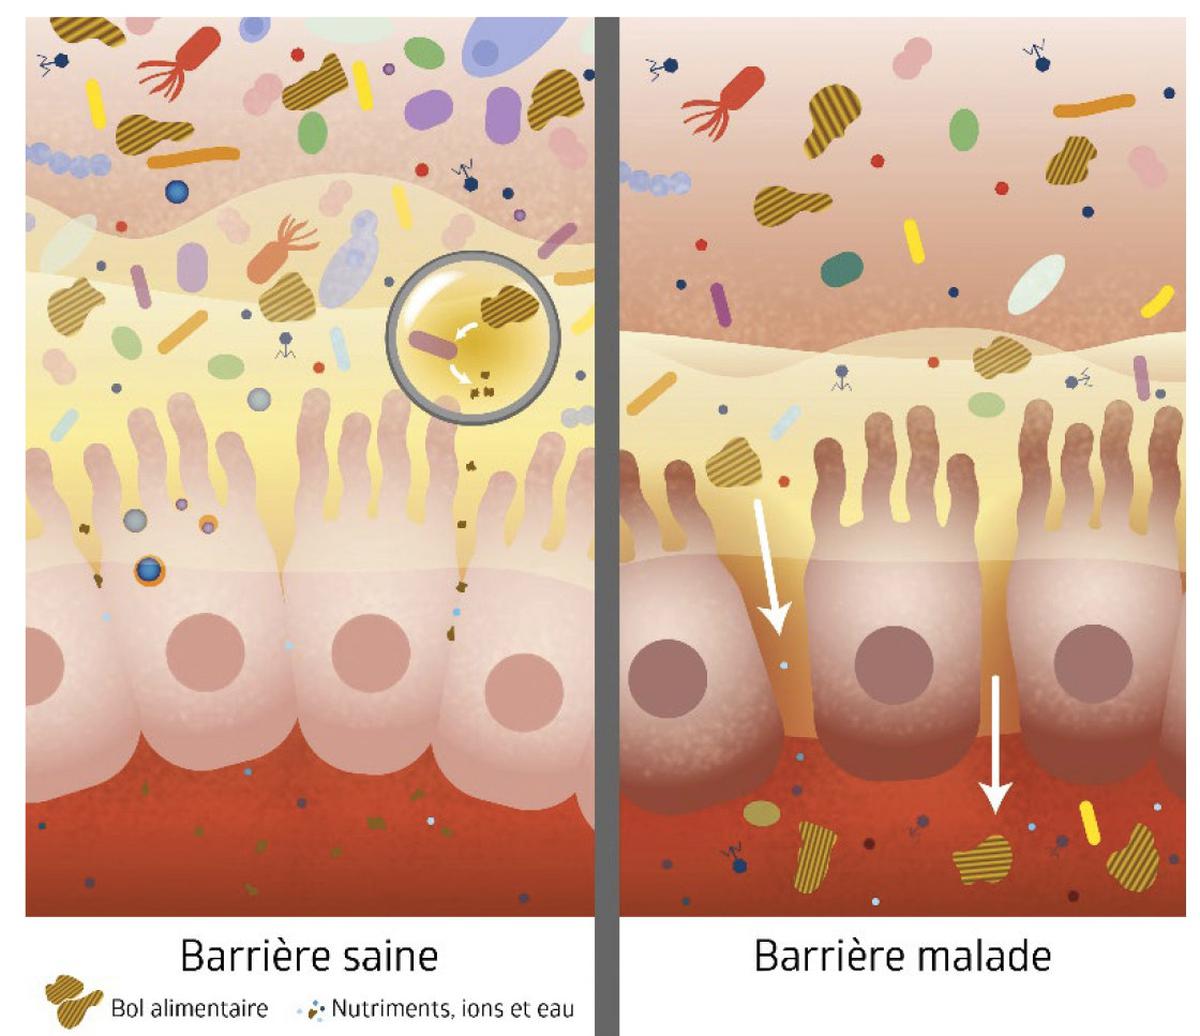 The intestinal barrier is the layer of cells on the outside of our intestines.  It is in direct contact with local germs.  It manages what we eat.  If it is changed, our health is damaged.